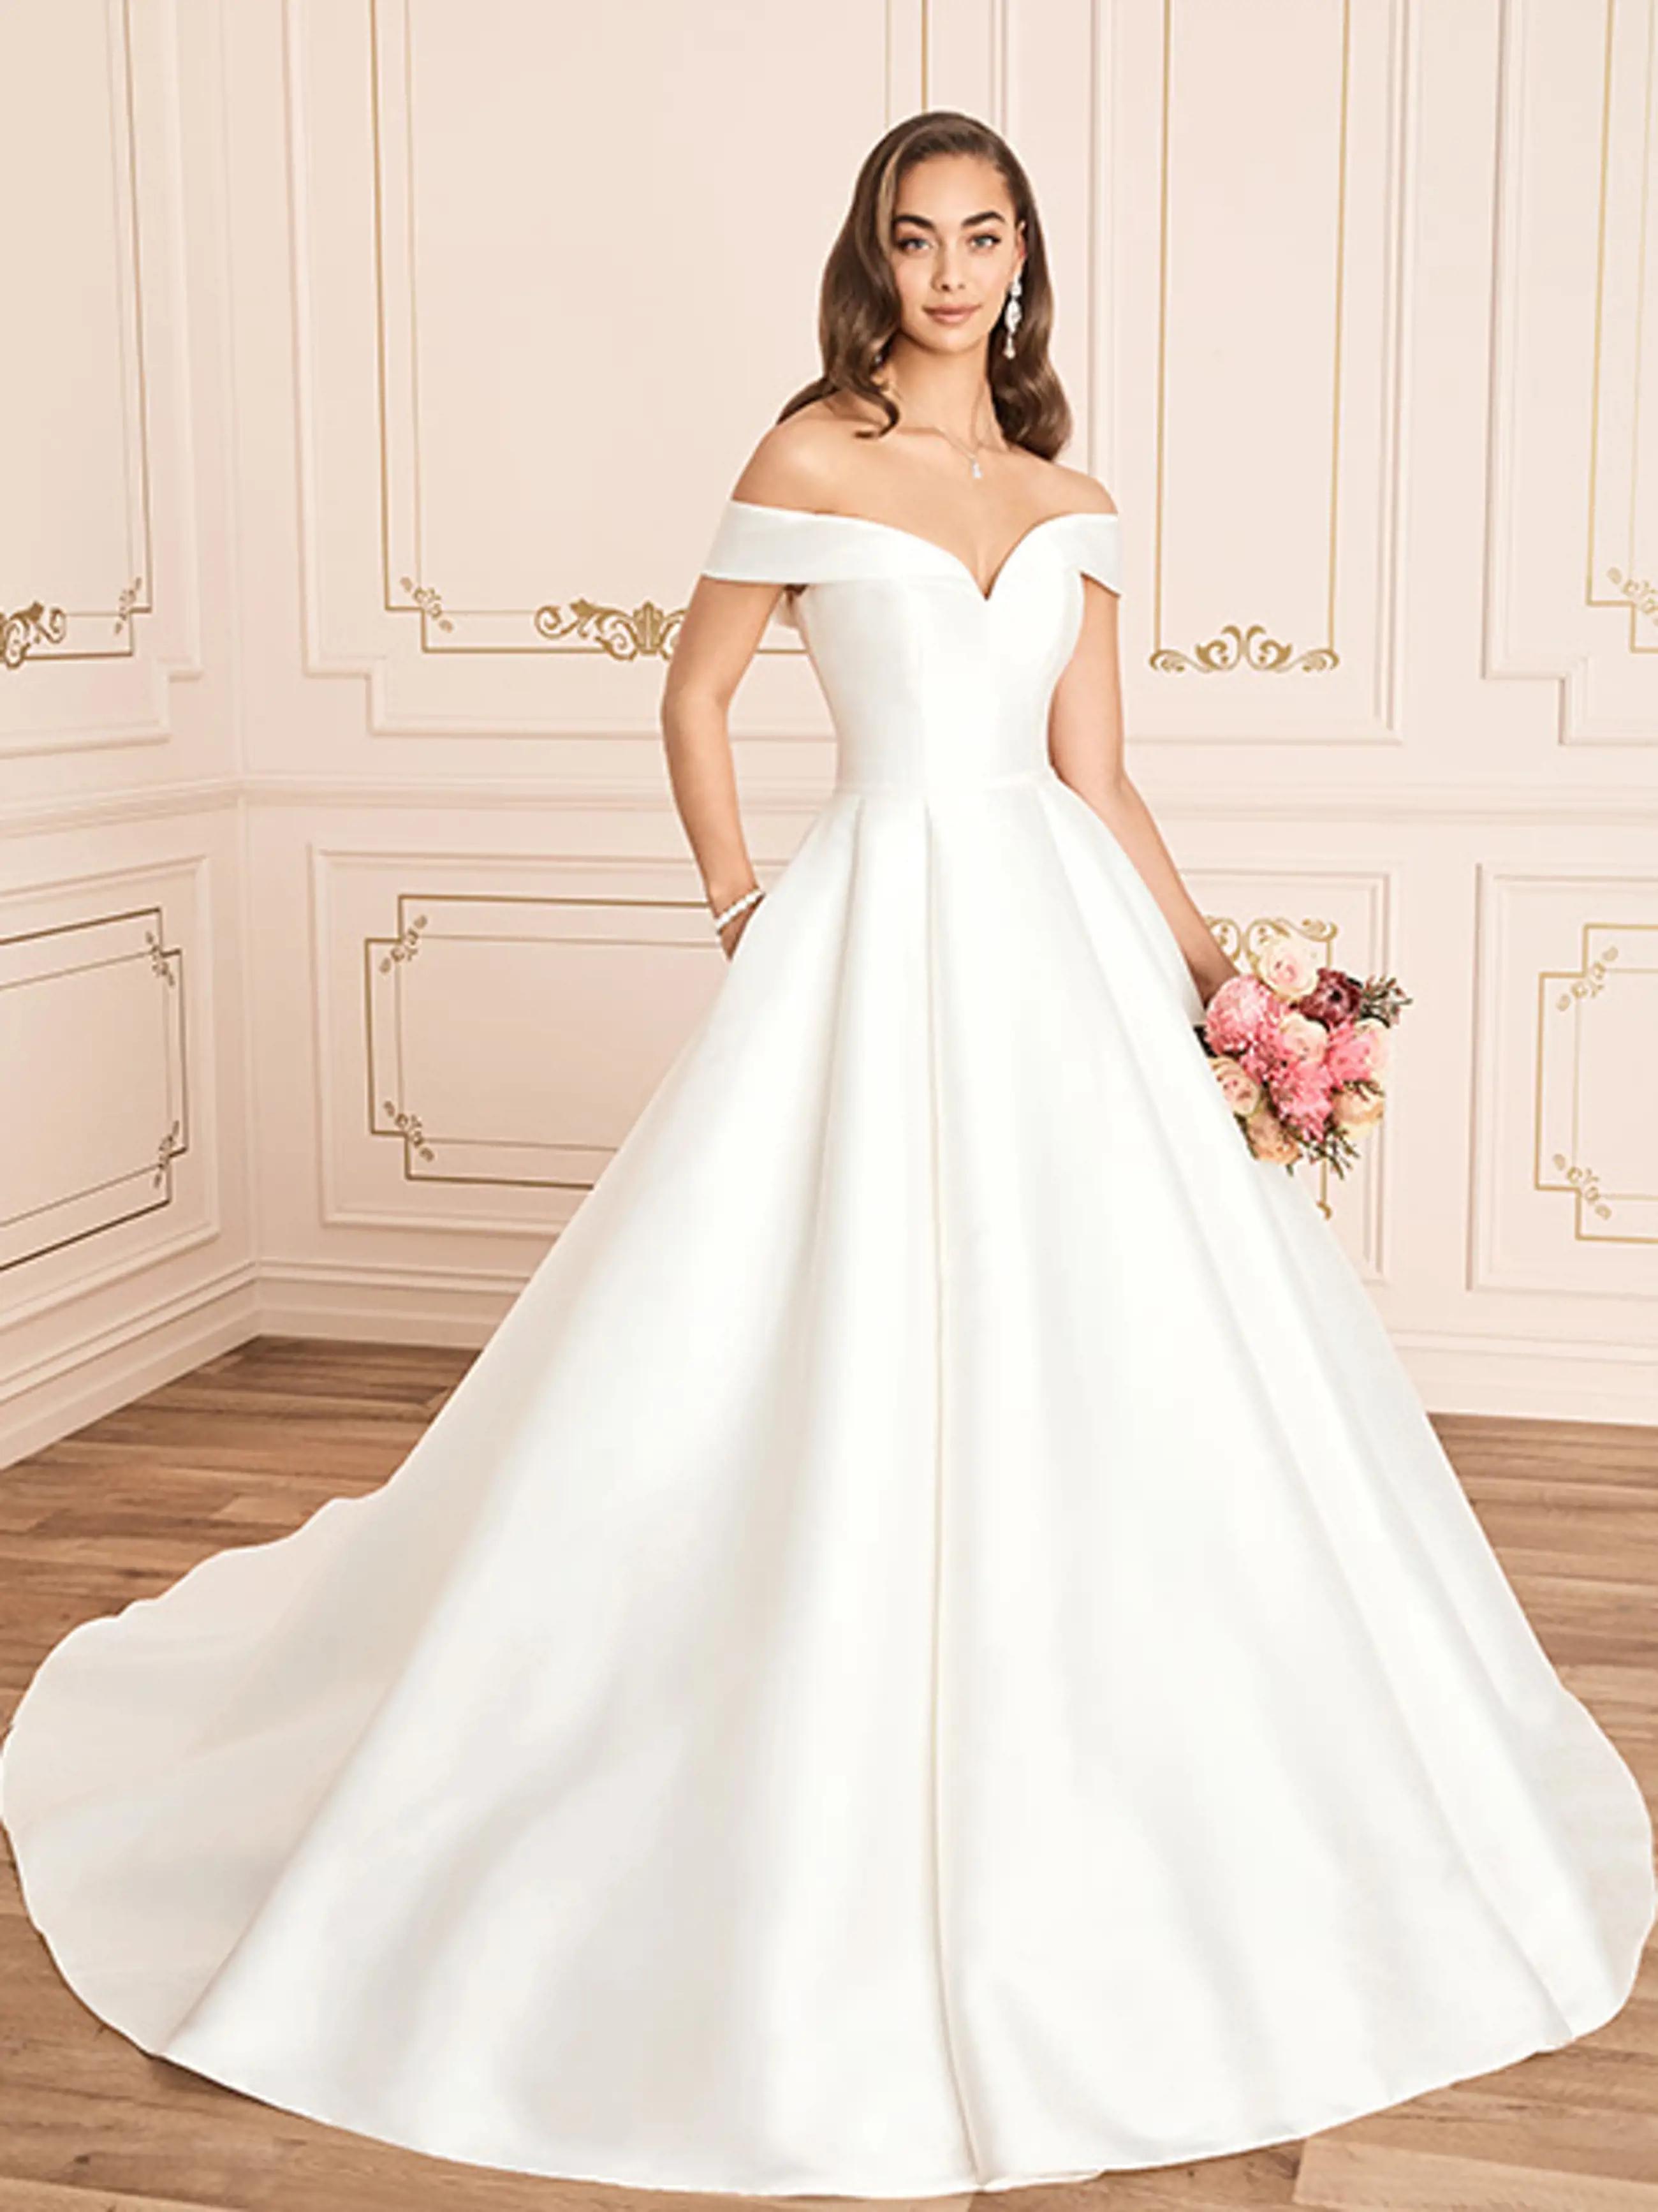 Bridal Gowns That Will Make You Feel Like a Princess! Image